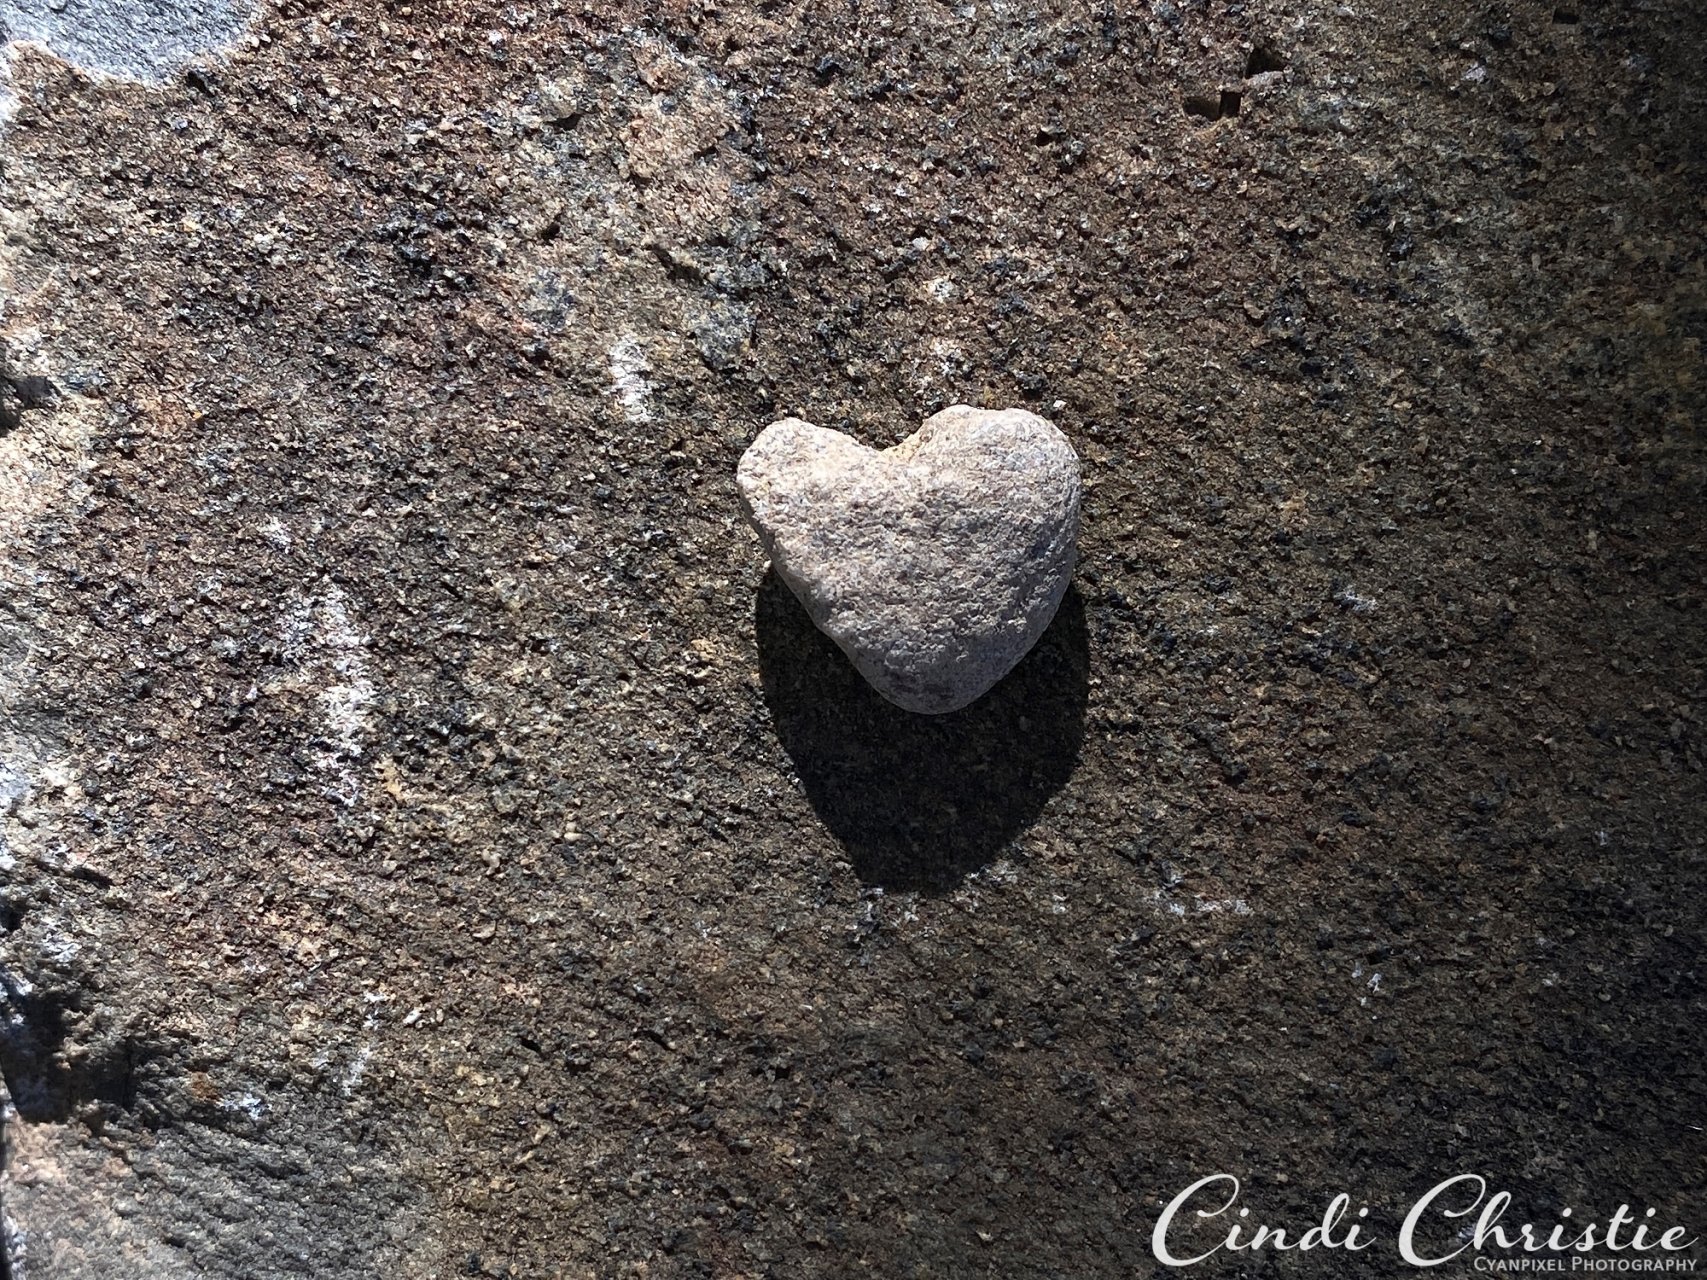 A heart-shaped pebble is found while planting daffodils on Oct. 17, 2020, in Salmon, Idaho.  (© 2020 Cindi Christie/Cyanpixel)